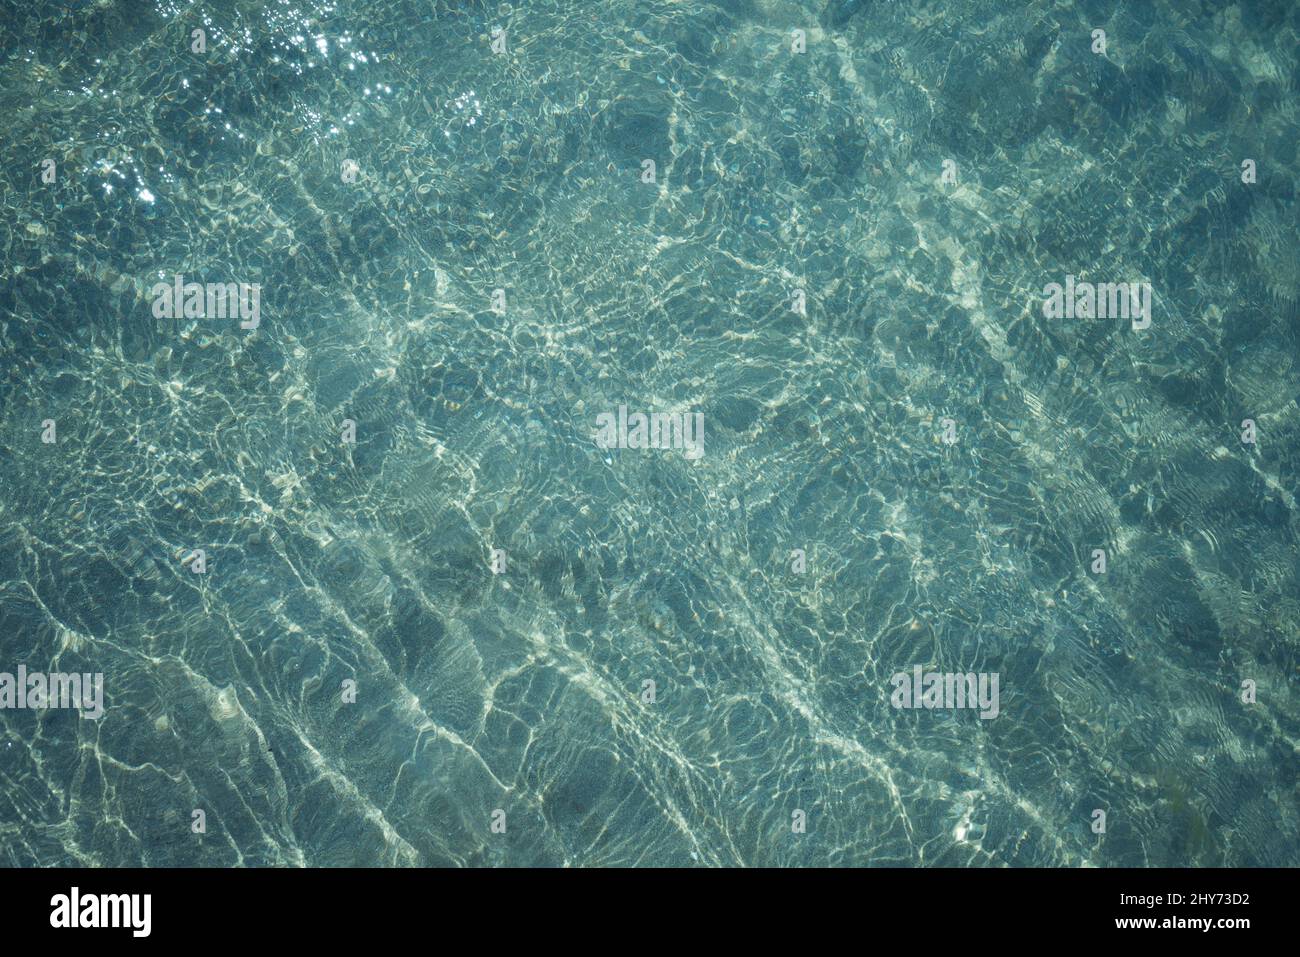 Background shot of aqua sea water surface with sun reflections Stock Photo